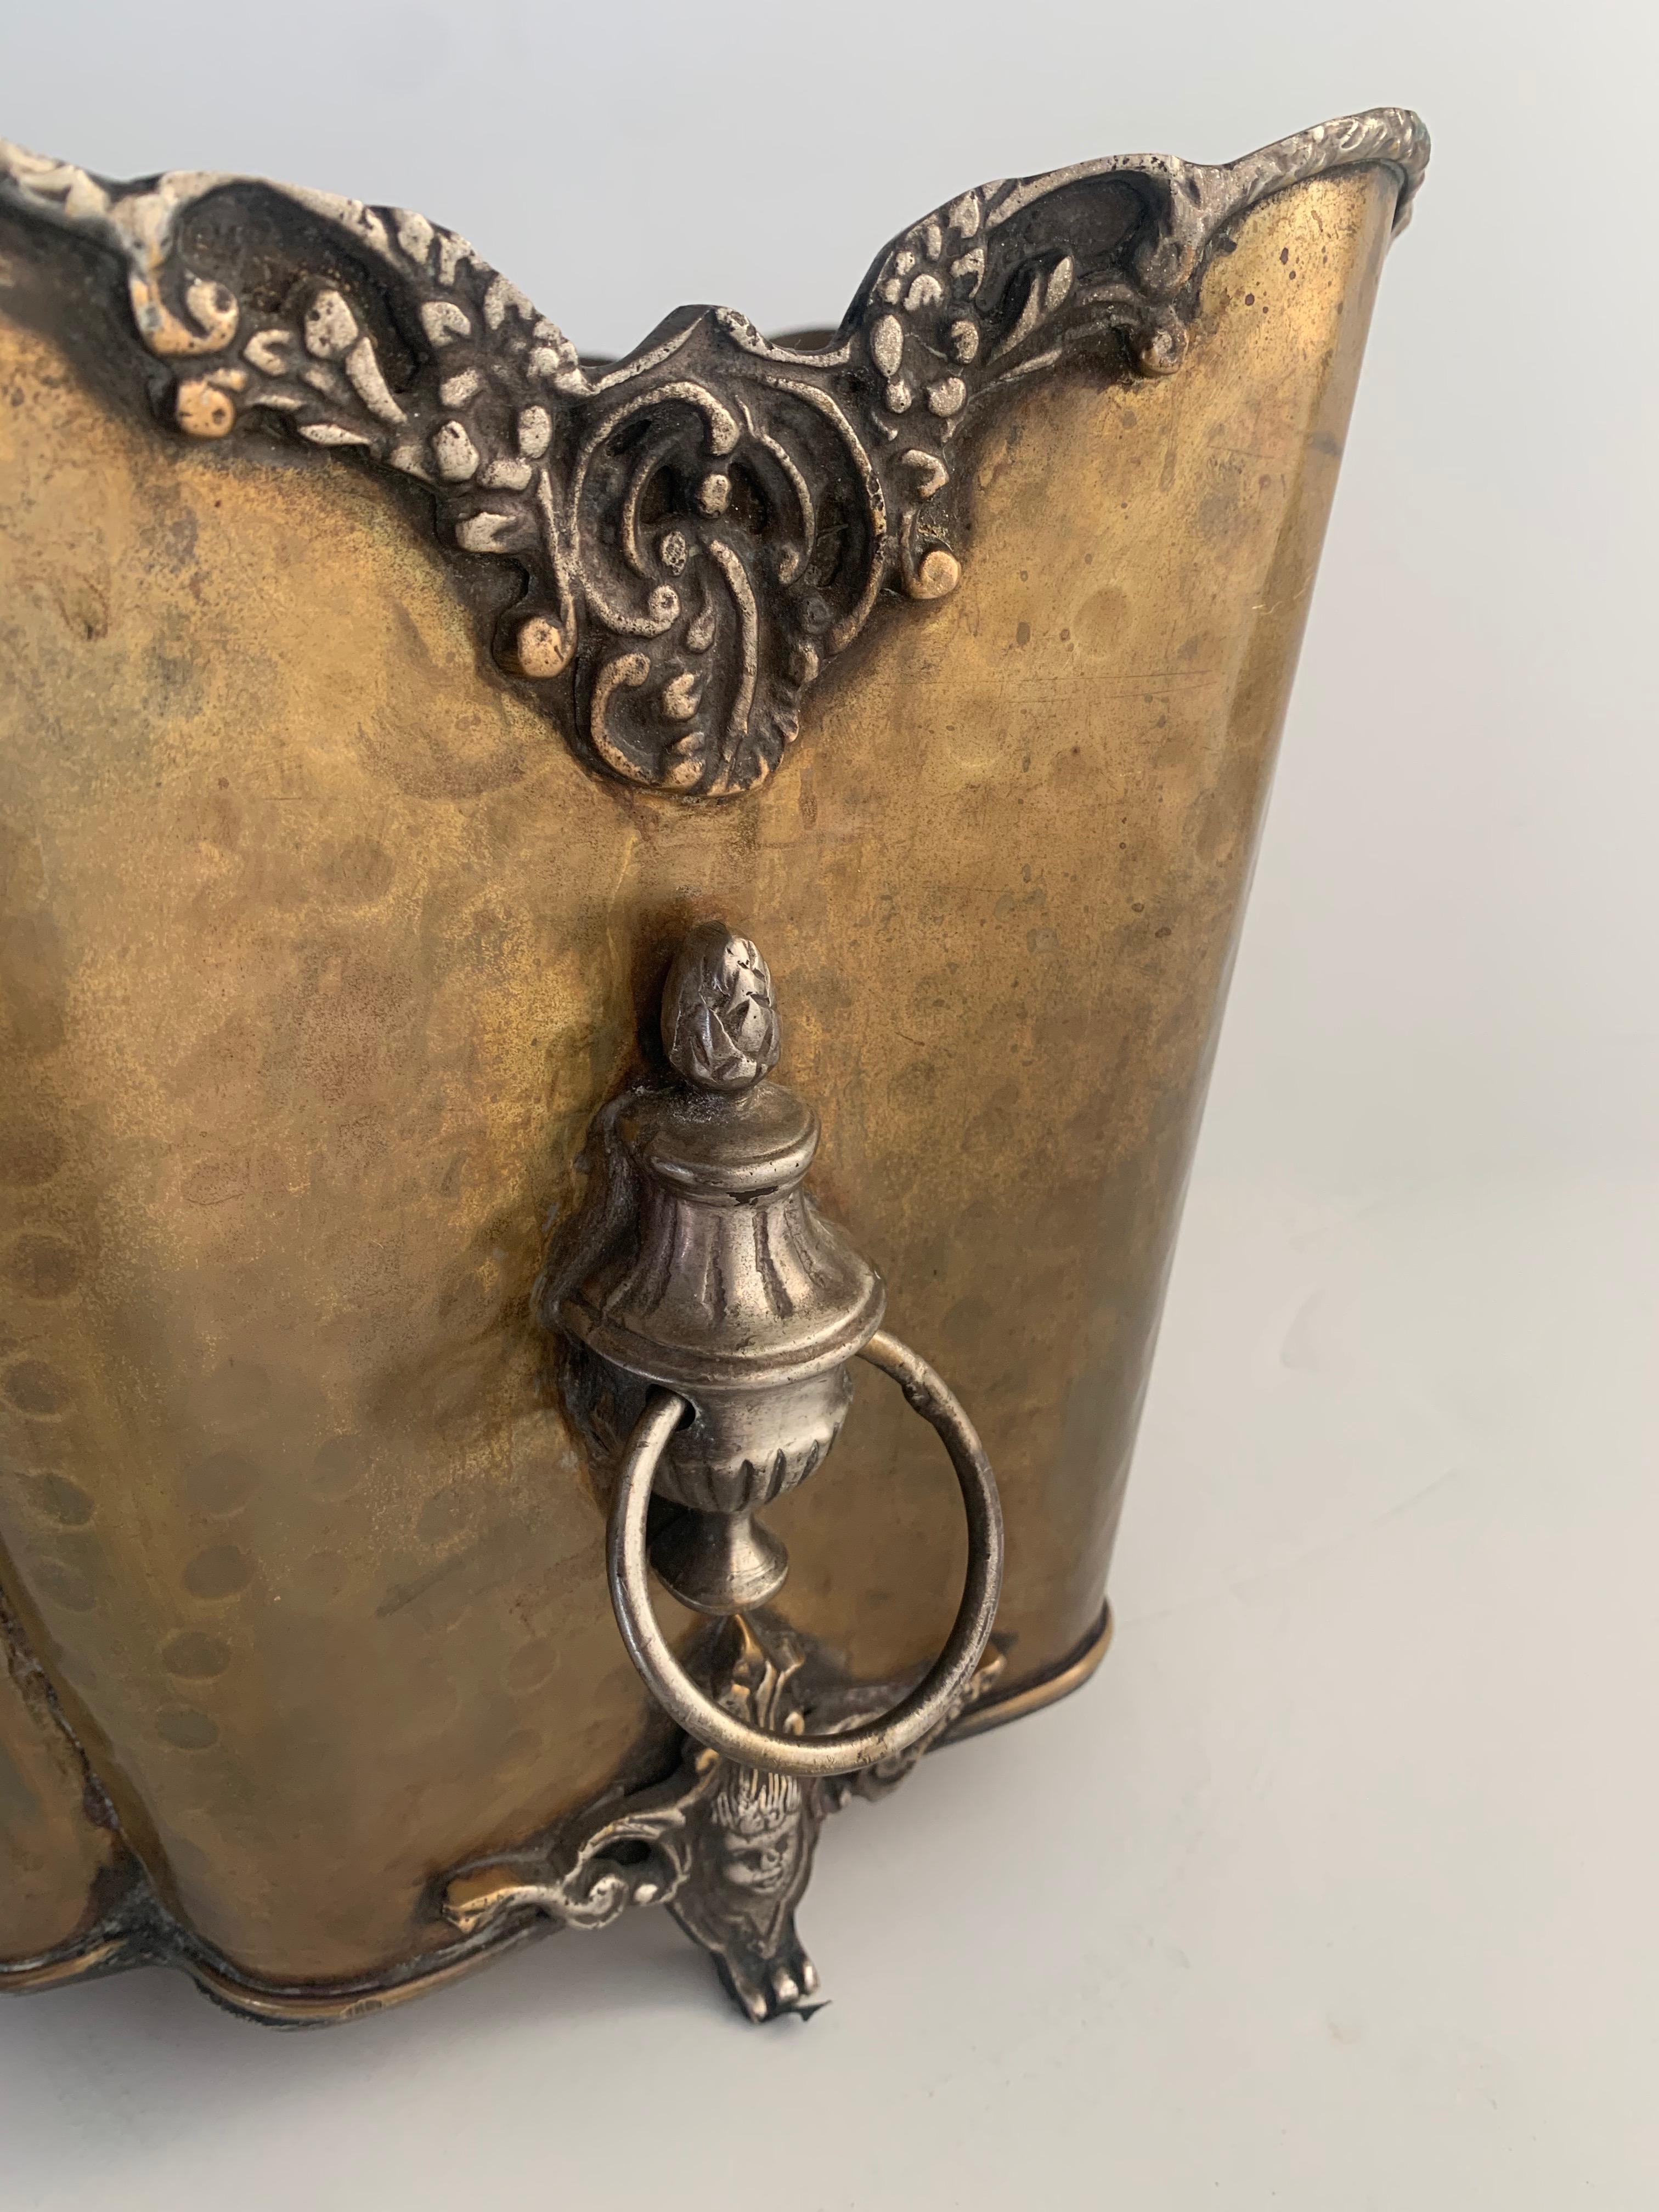 A wonderfully detailed hammered brass planter with lion handles, the piece is perfect for a flowering plant, a center piece or even magazines. The details and claw feet are very nice.